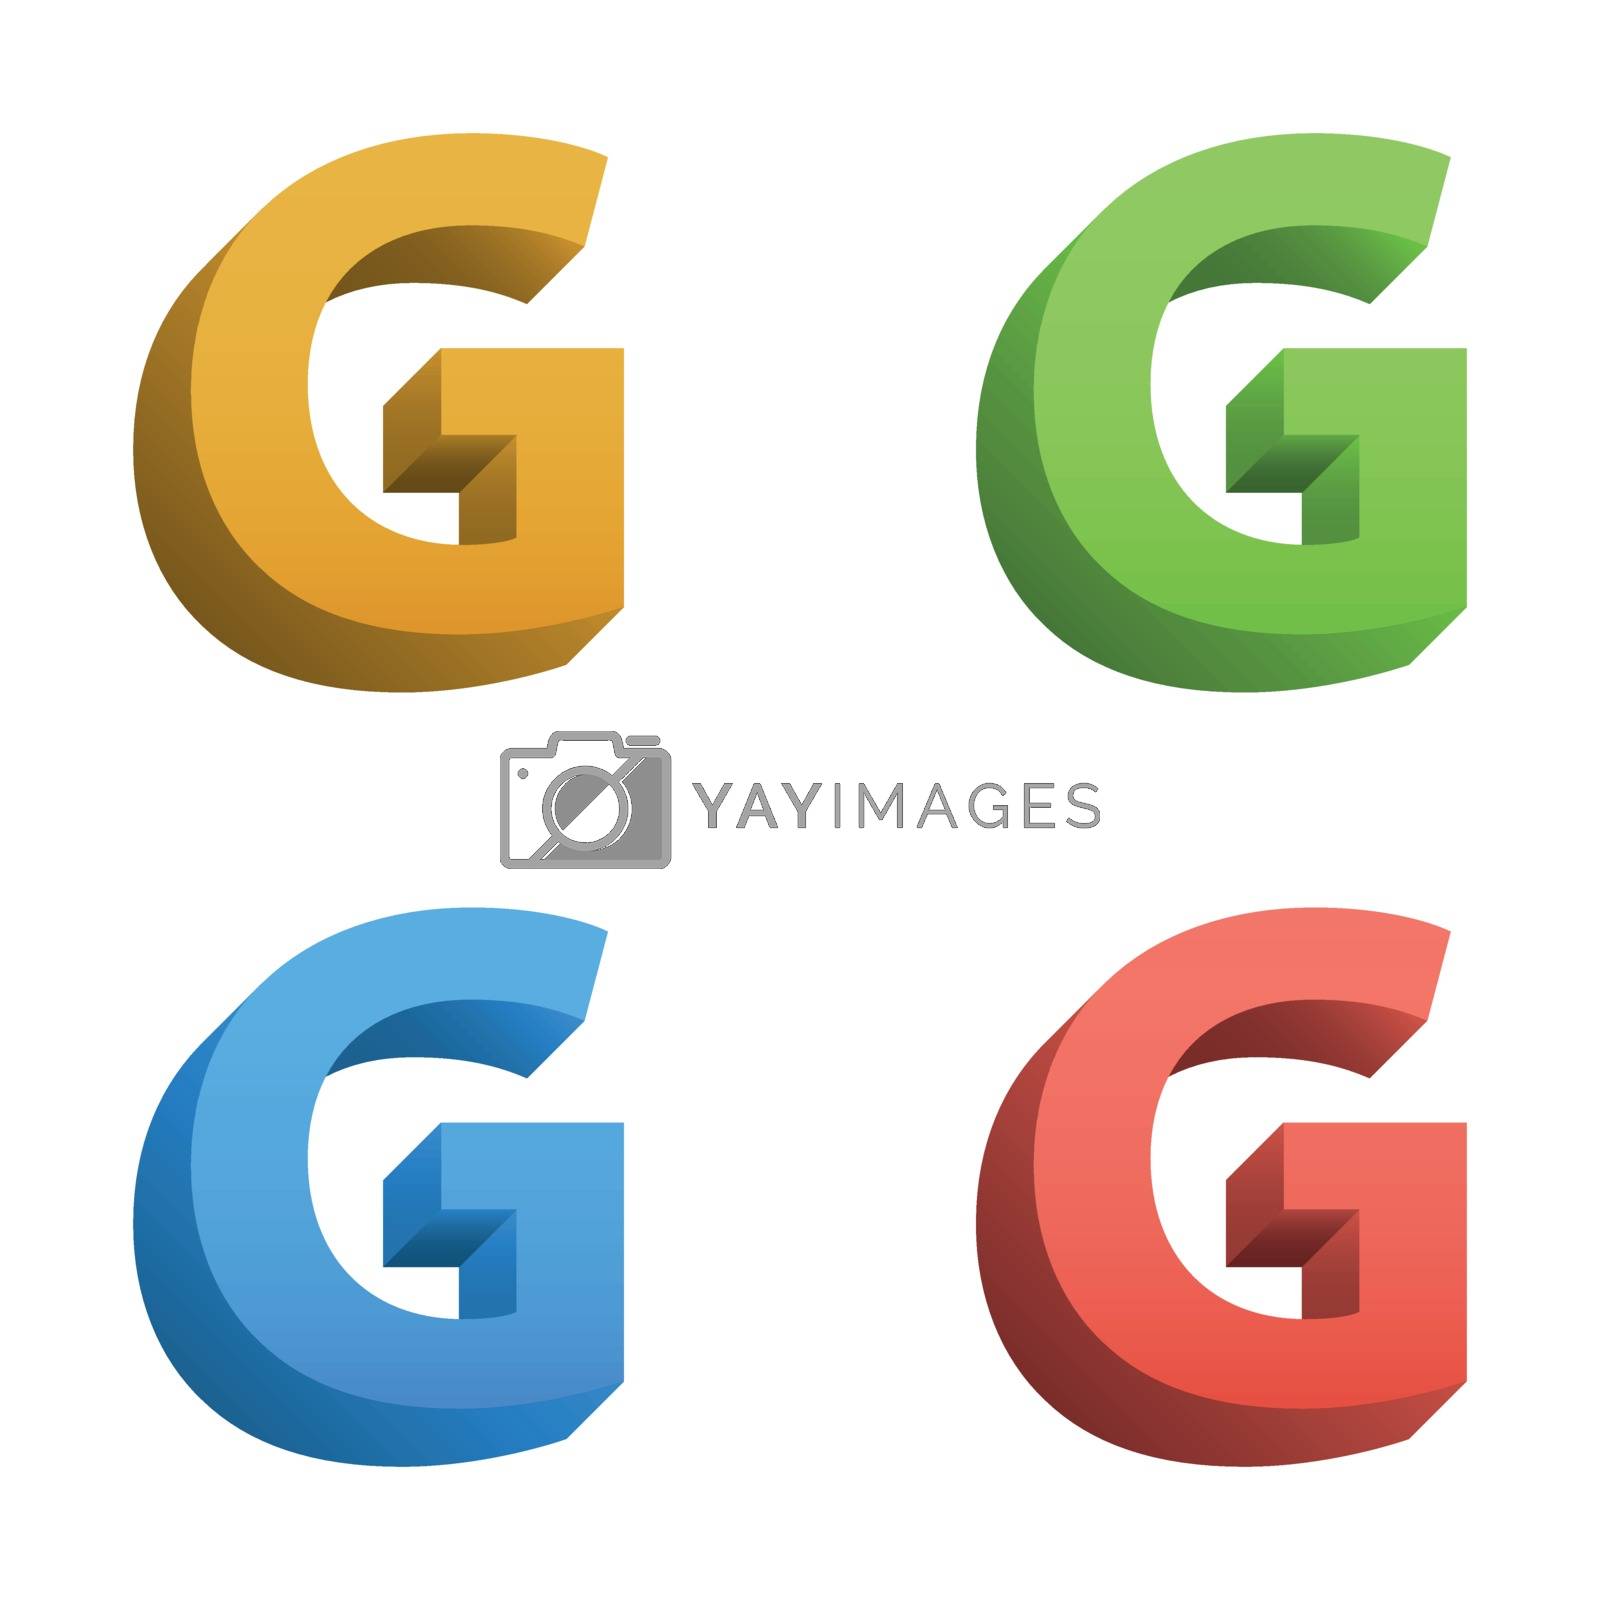 Royalty free image of Vector 3d color alphabet by ggebl